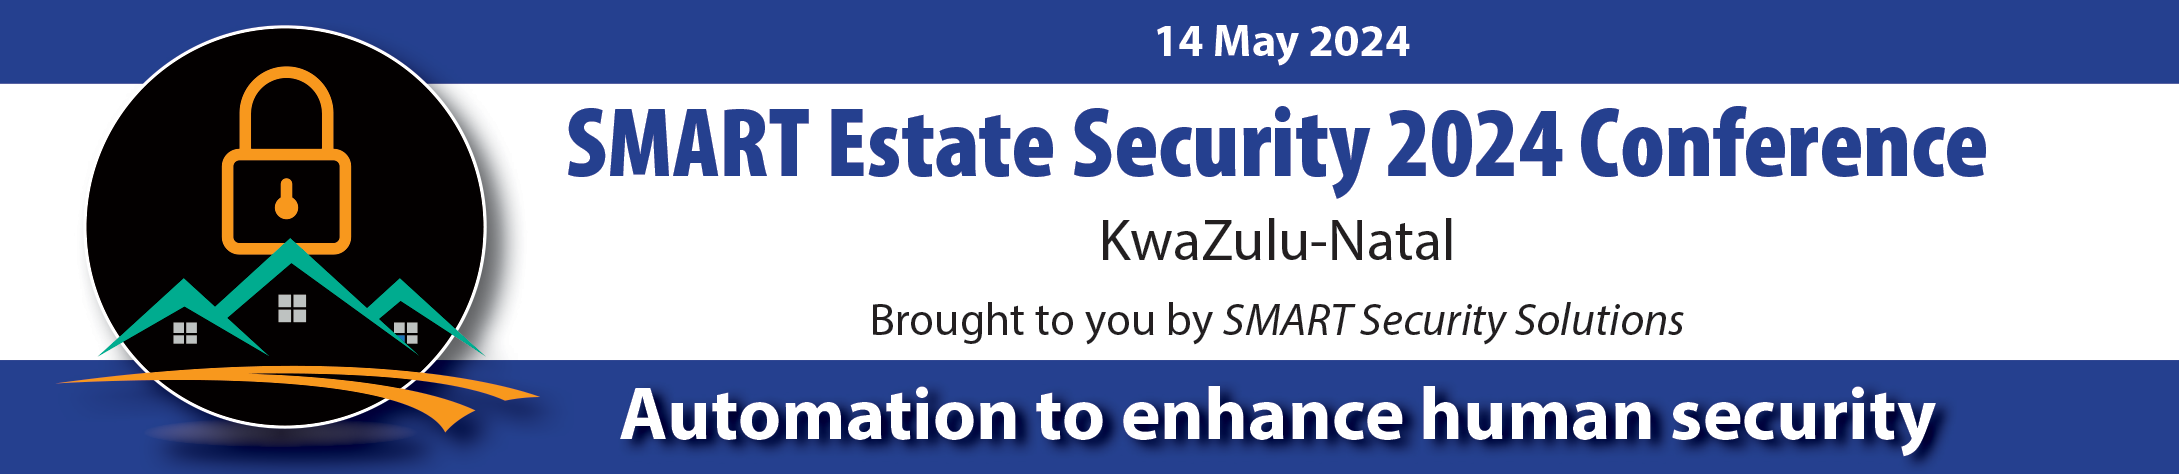 SMART Residential & Commercial Estate Security Conference